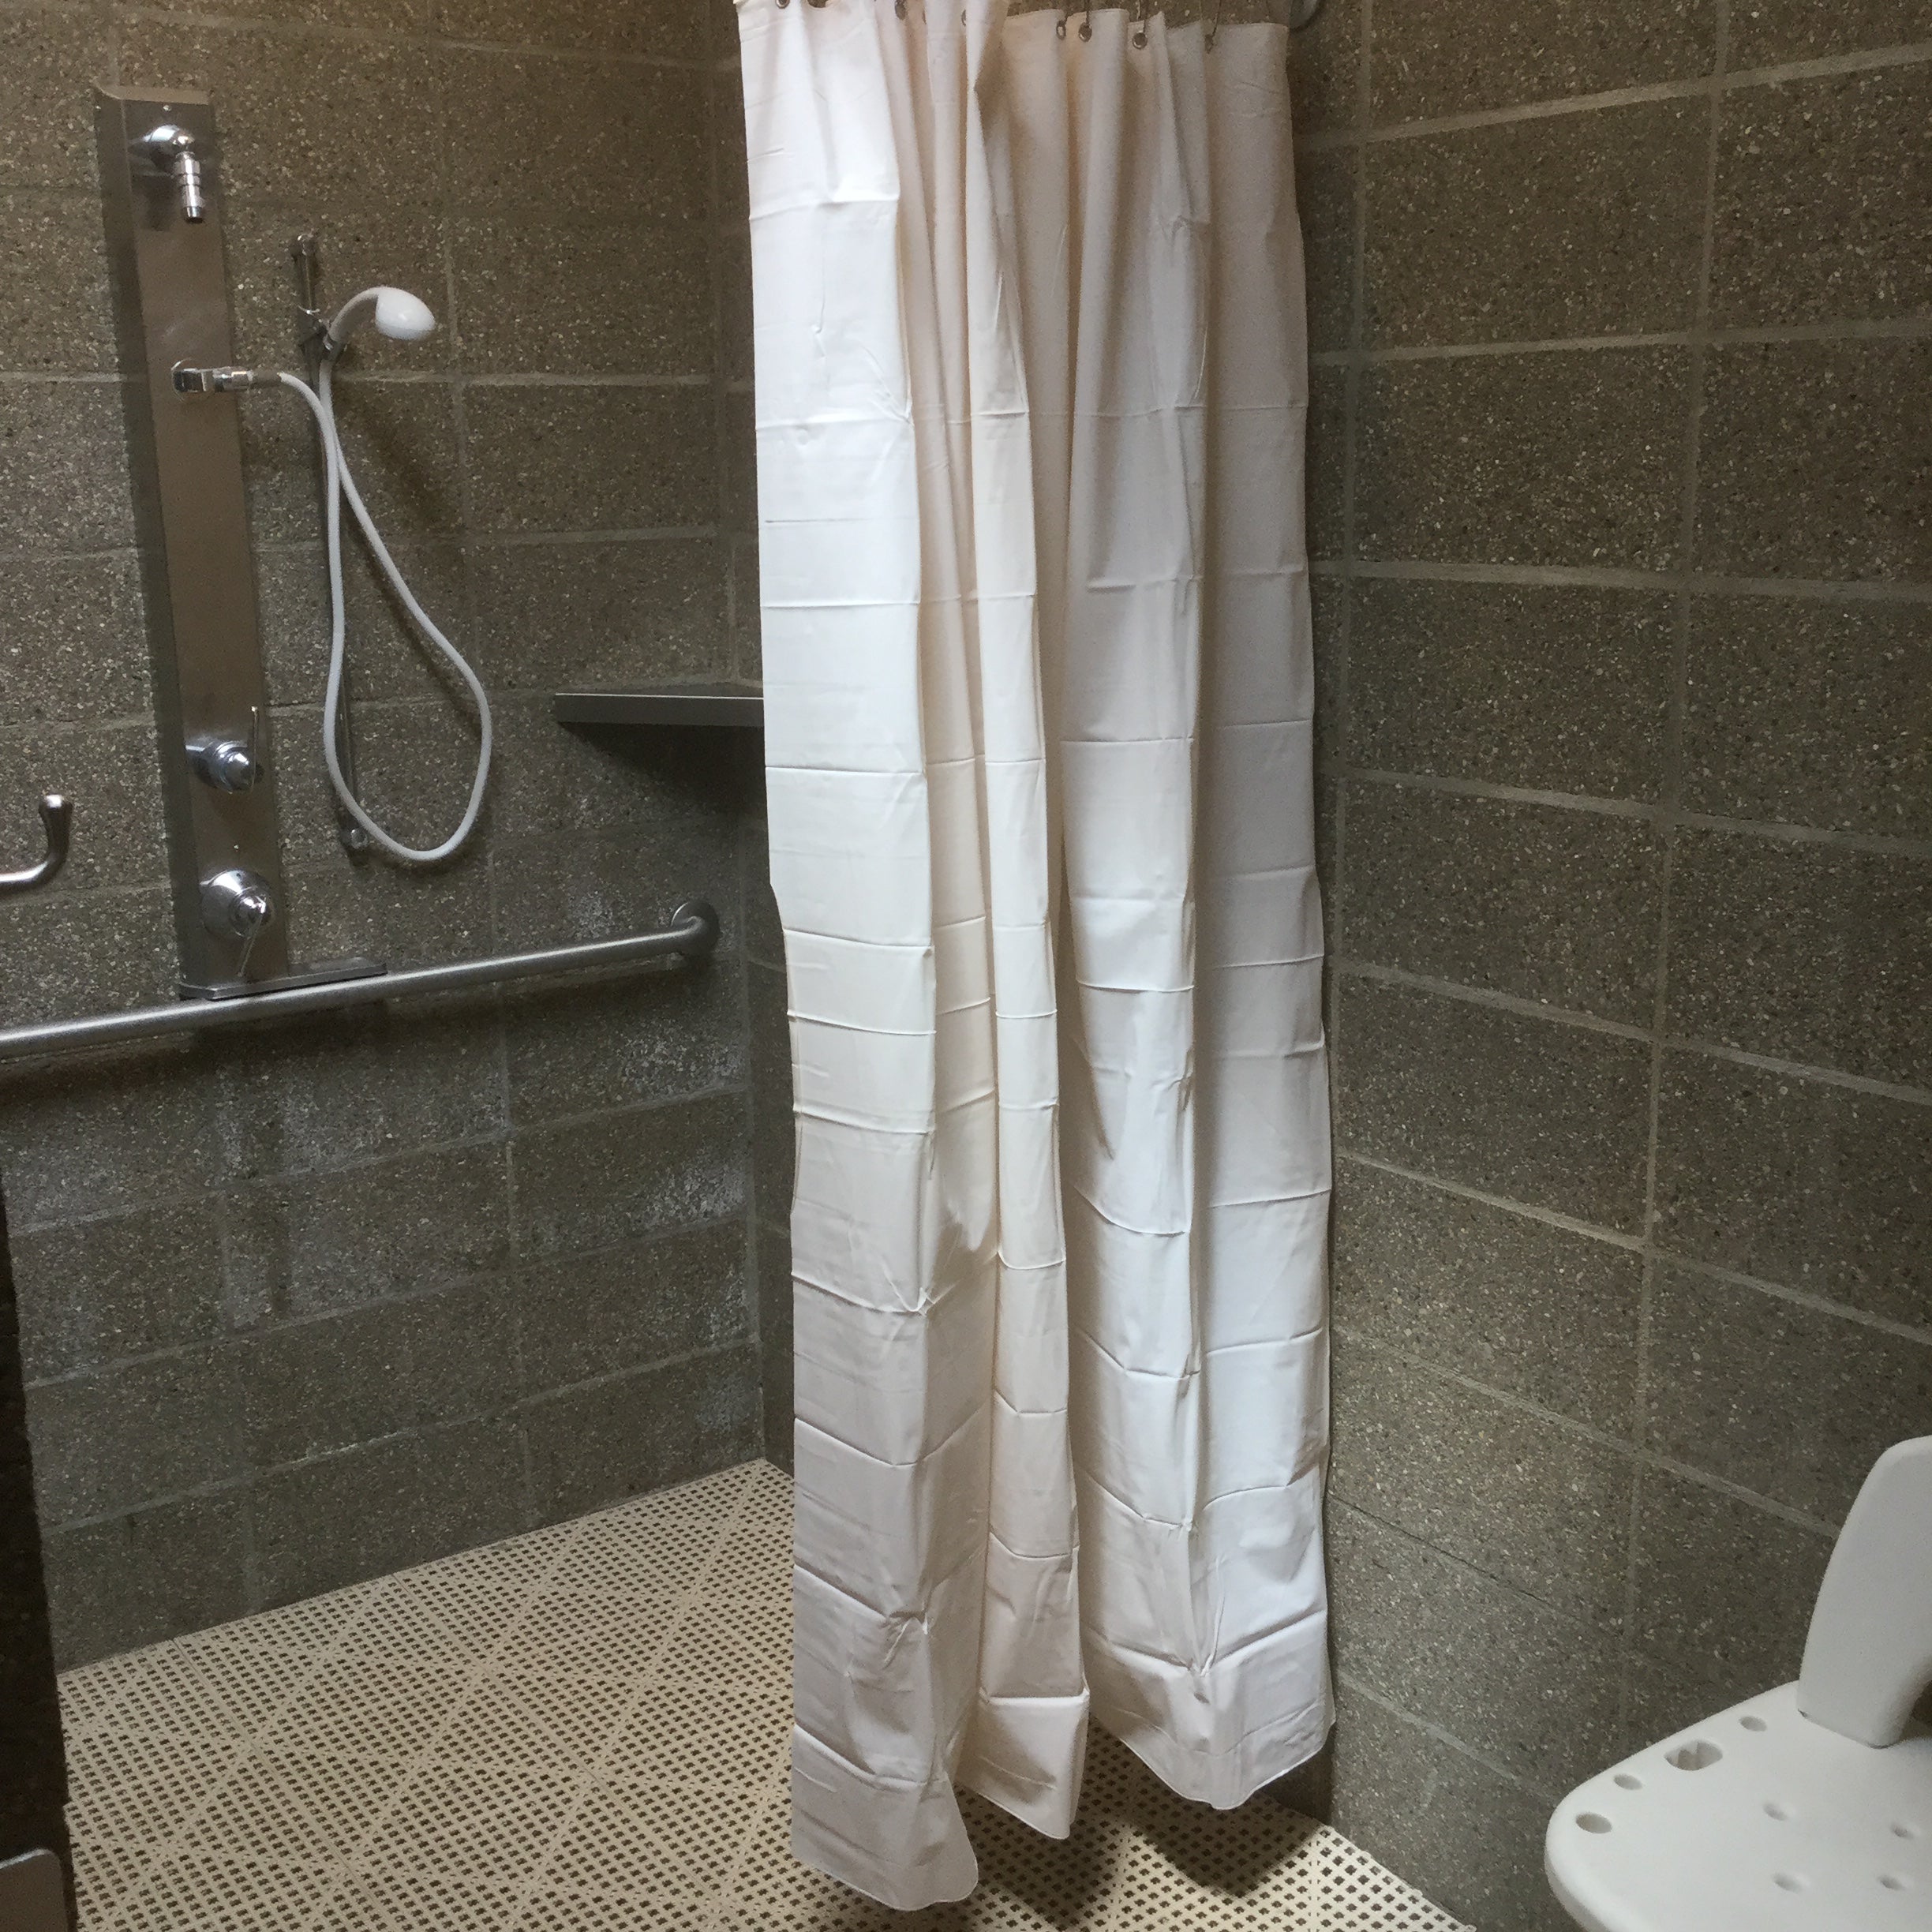 Handicap accessible bathrooms and shower with shower stools